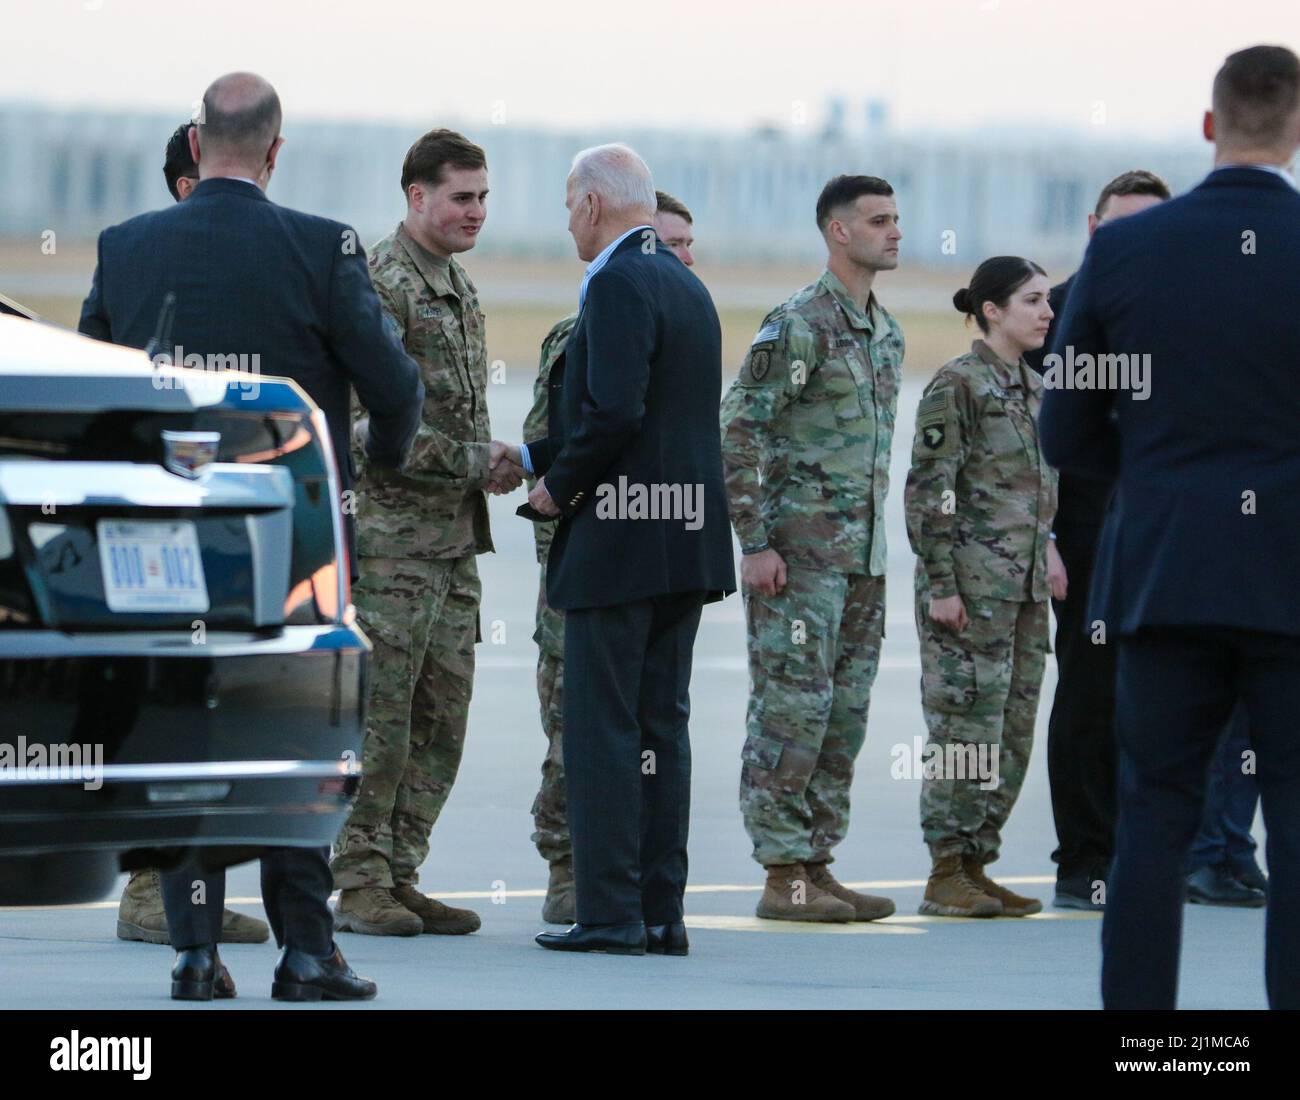 U.S. President Joseph R. Biden Jr. and other senior officials greet Soldiers on the tarmac at Rzeszow-Jasionka Airport, Poland, on March 25, 2022. The President, Secretary of Defense Lloyd Austin, and other officials visited troops who are currently deployed to Poland in support of our NATO Allies. (U.S. Army photo by Sgt. Catessa Palone) Stock Photo